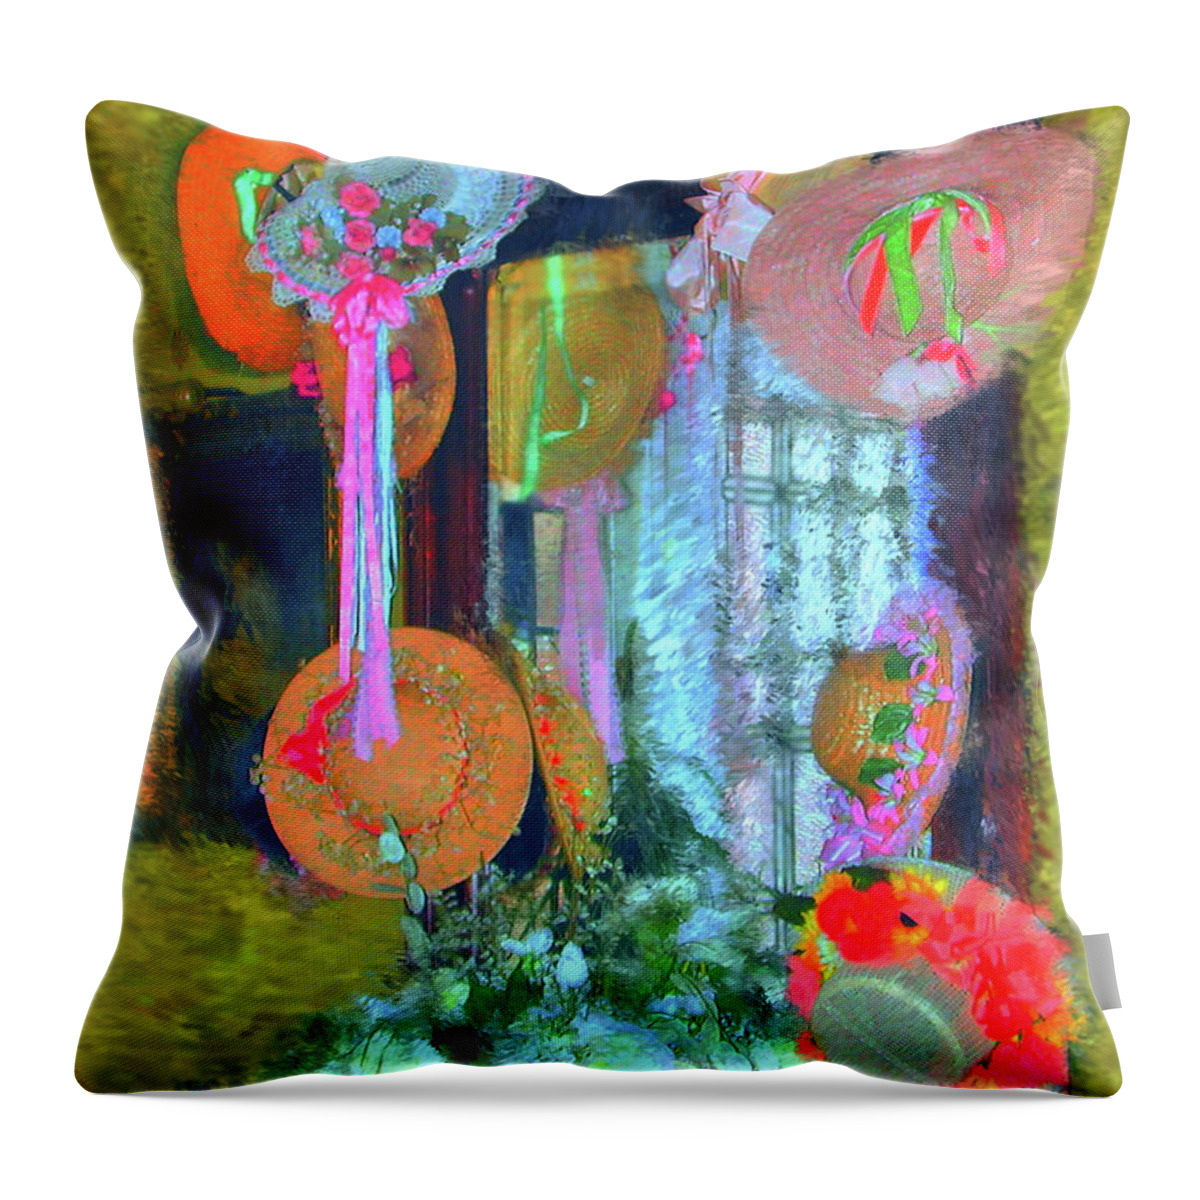 Hats Throw Pillow featuring the painting Victorian Hats  by Joel Smith